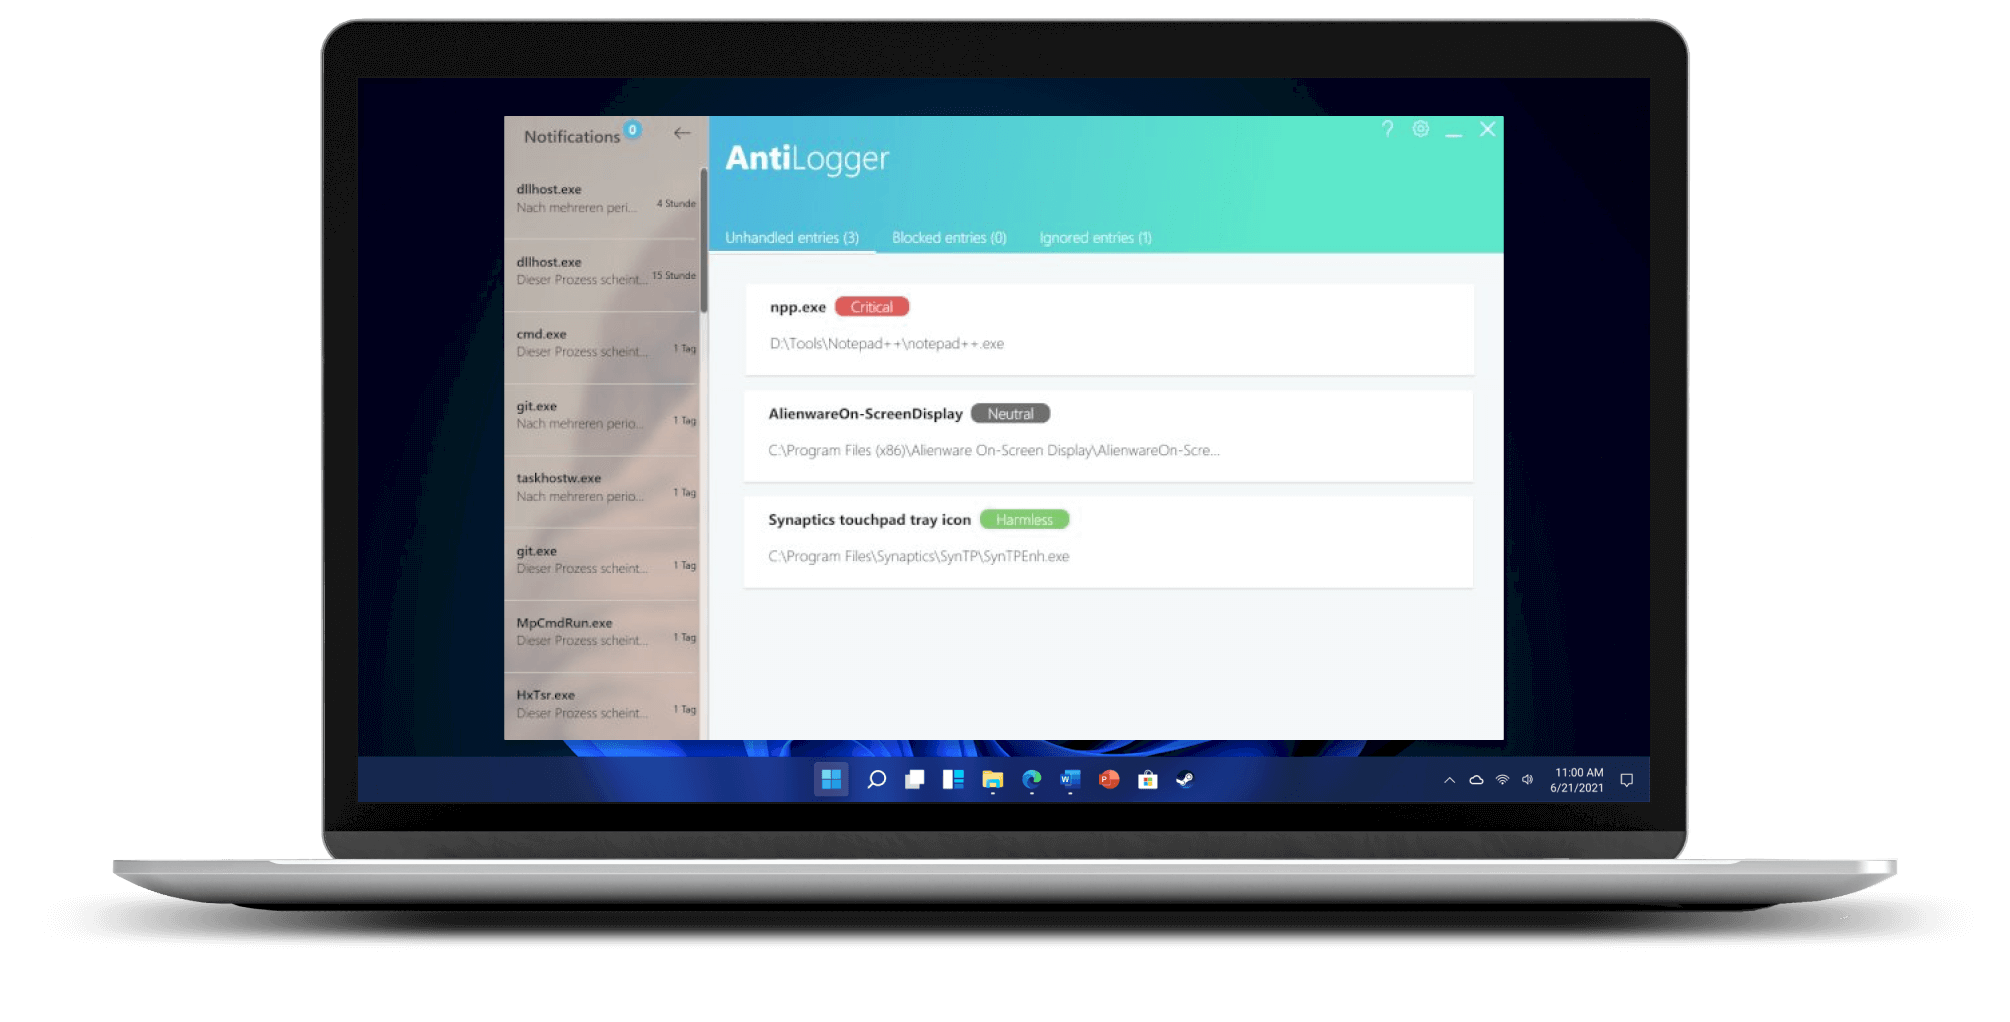 AntiLogger detects spying on your PC